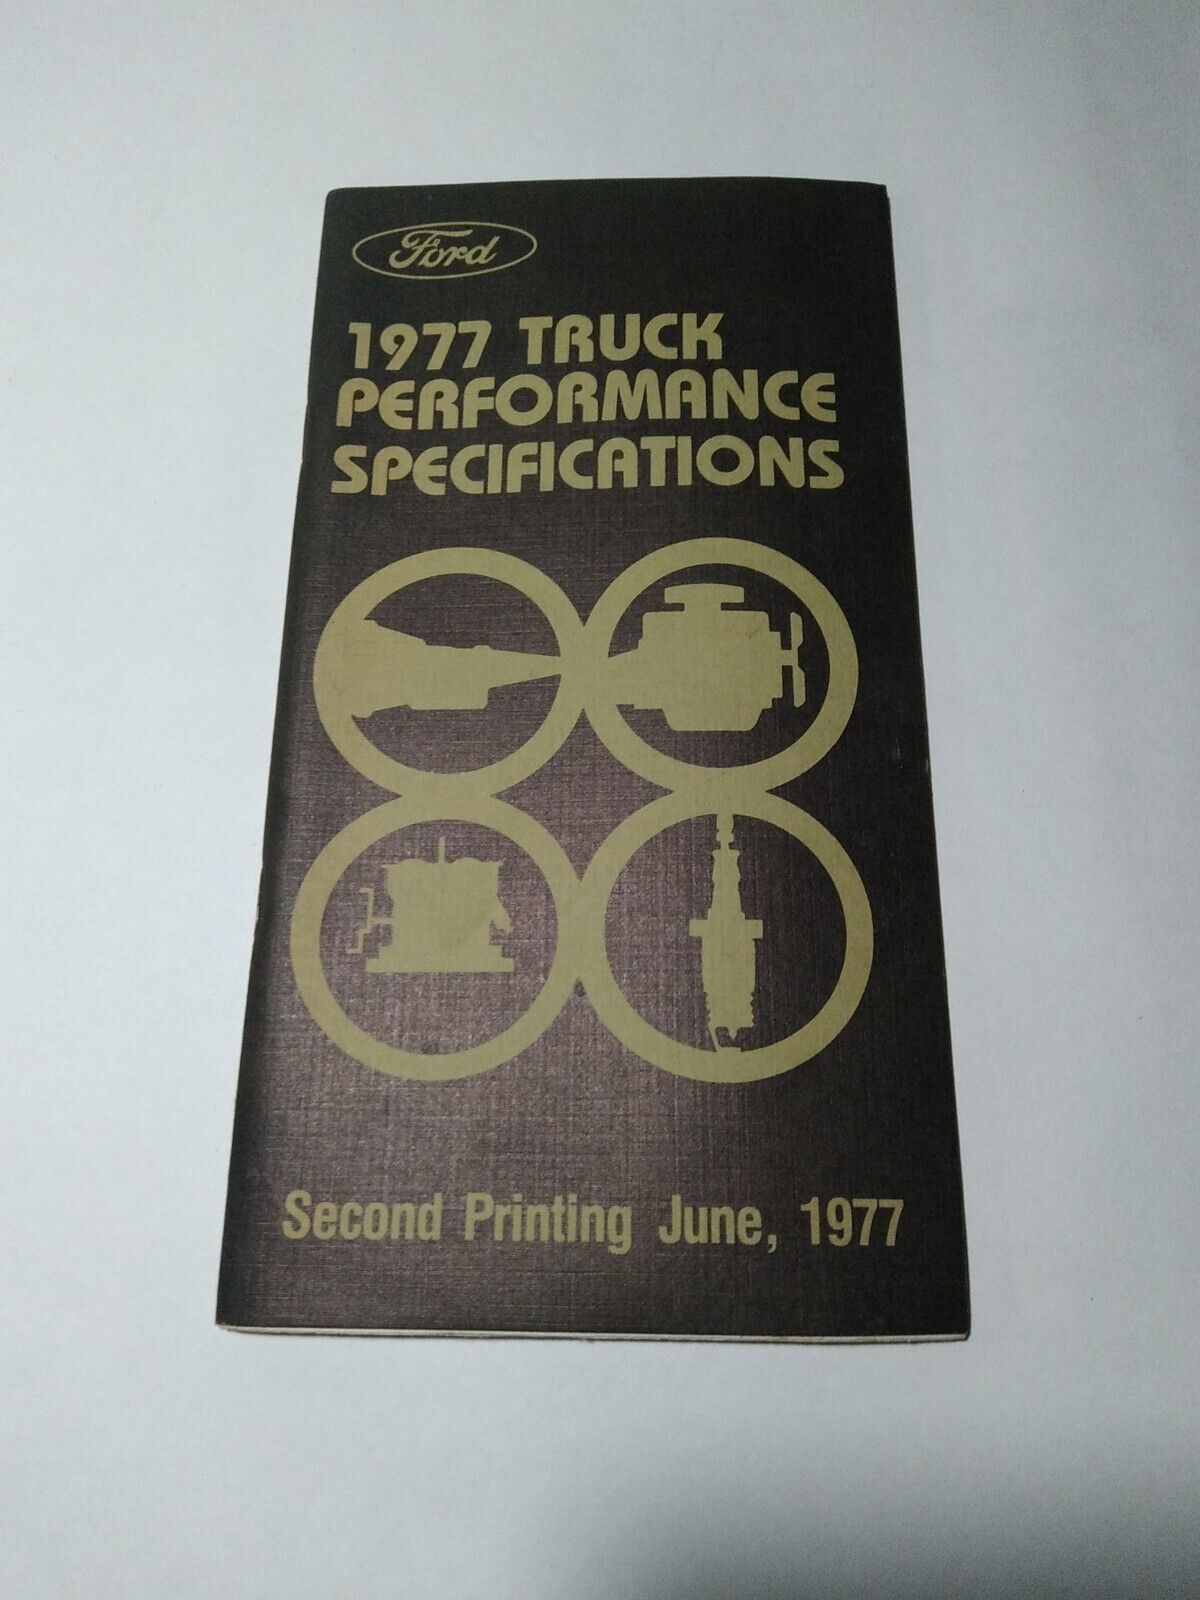 Vintage 1977 Ford Truck Performance Specifications Booklet